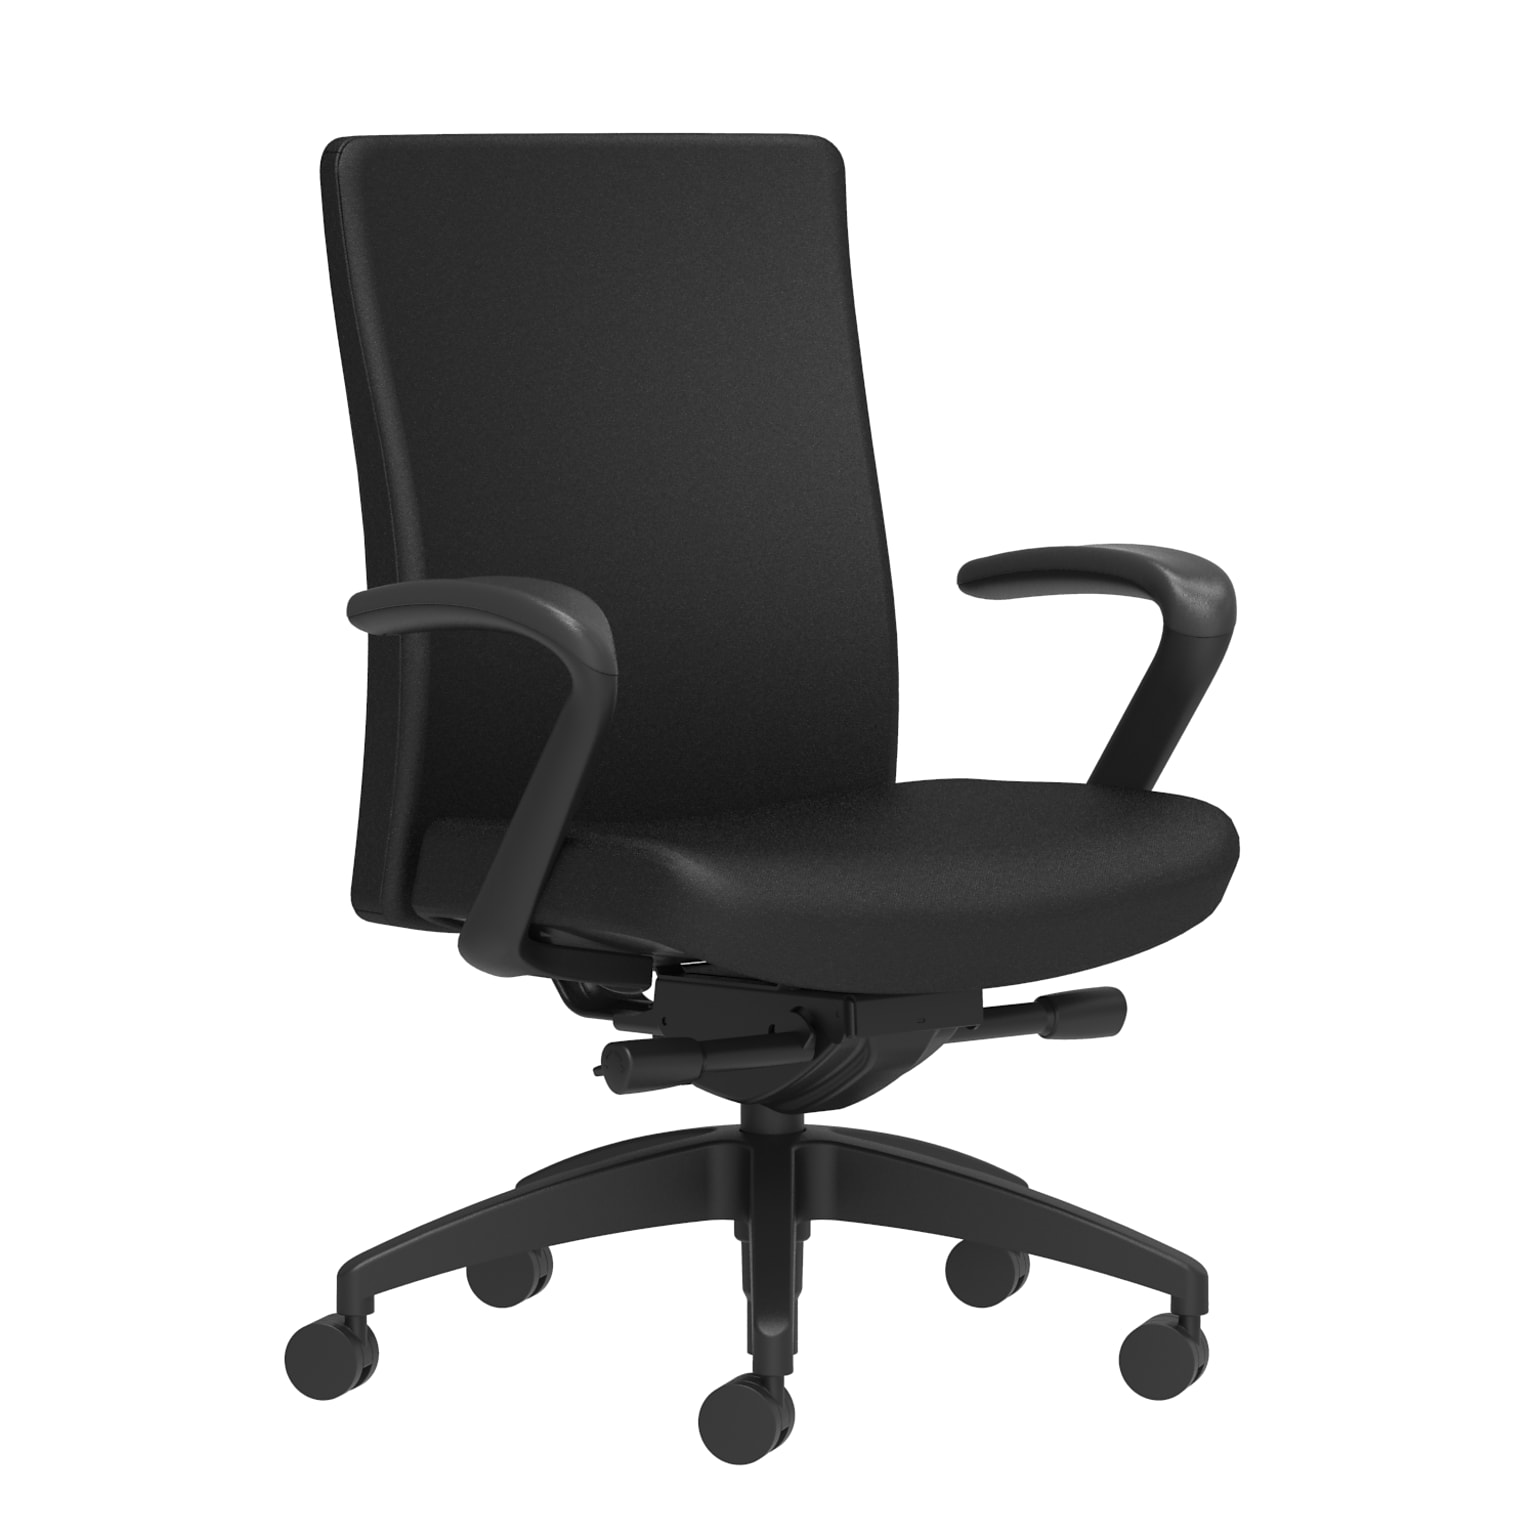 Union & Scale Workplace2.0™ Task Chair Upholstered, Fixed Arms, Black Fabric, Synchro Tilt Seat Slide (54187)